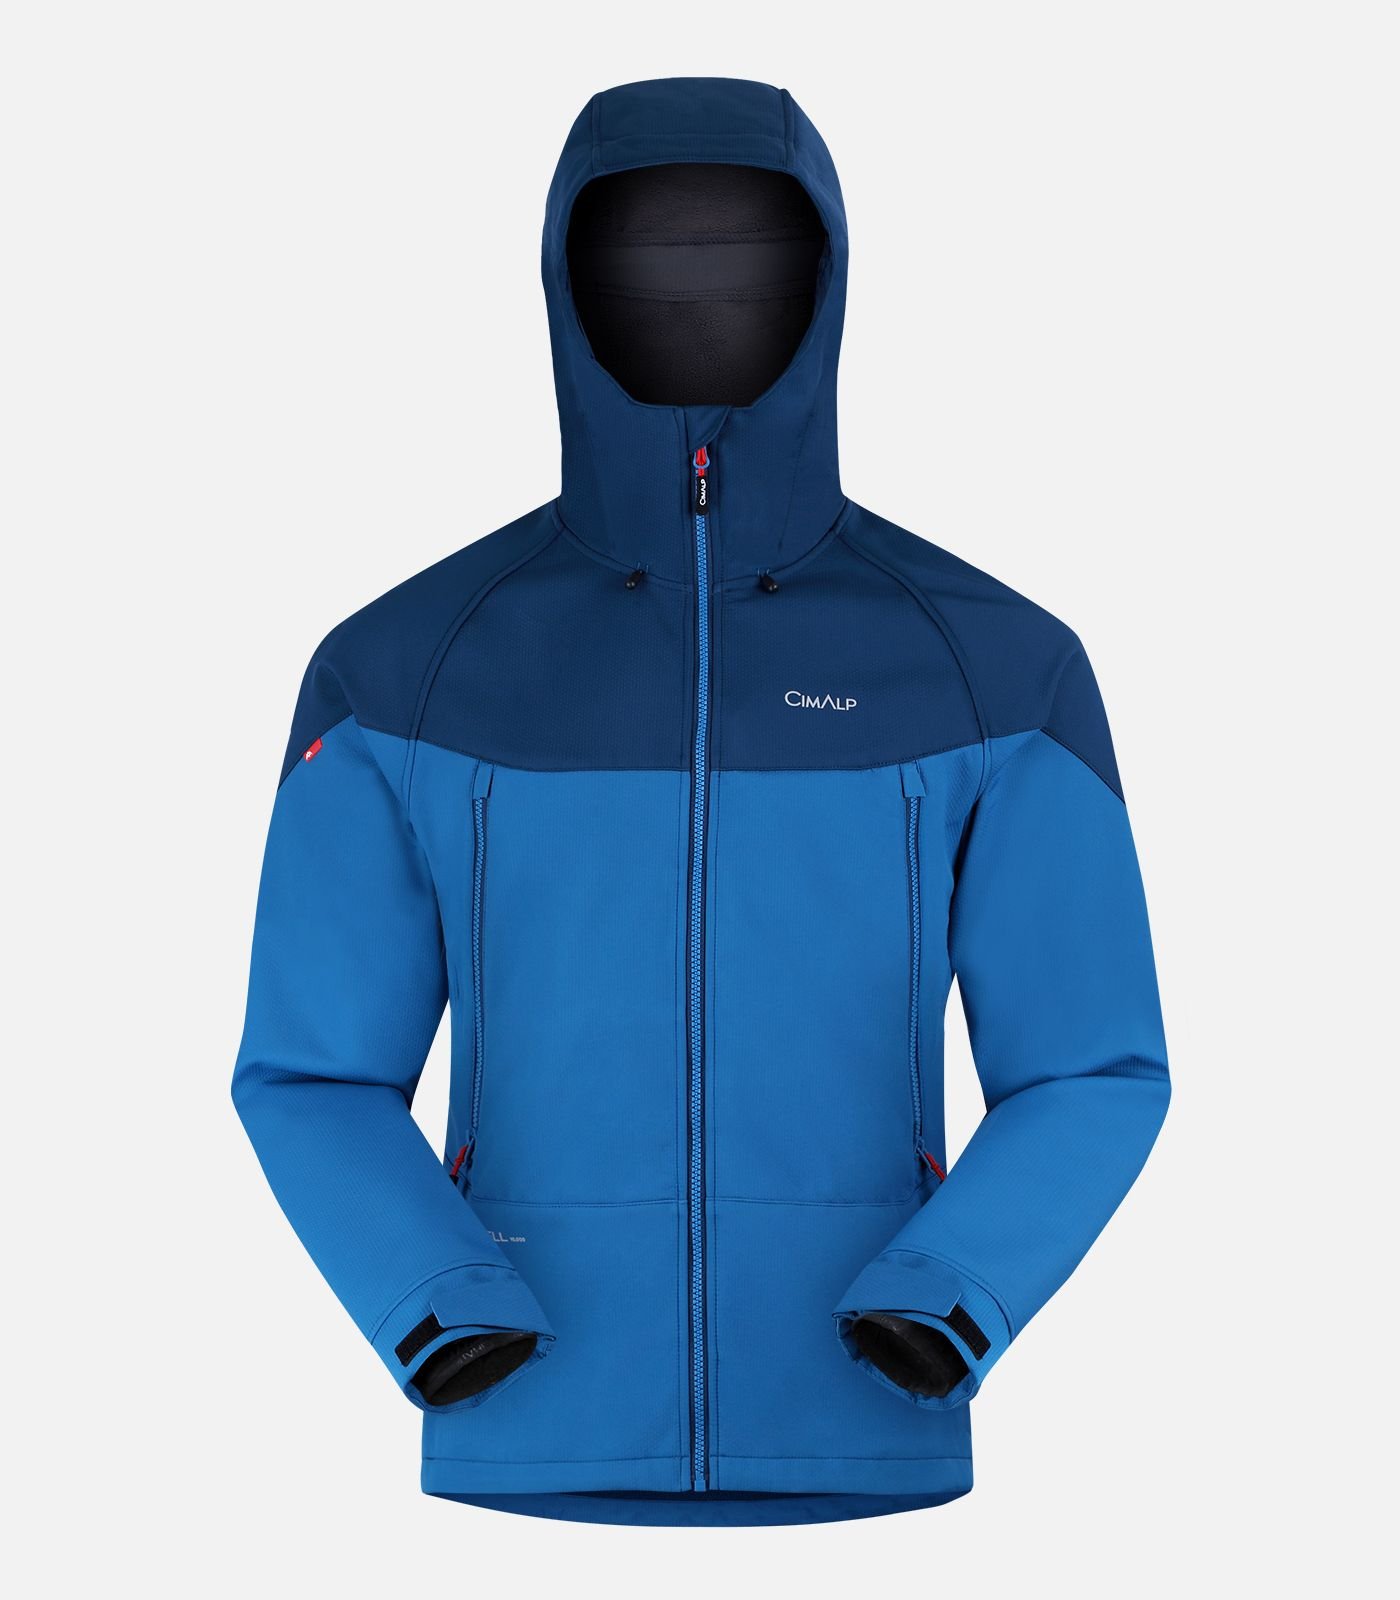 Chaqueta Softshell Superstrong®